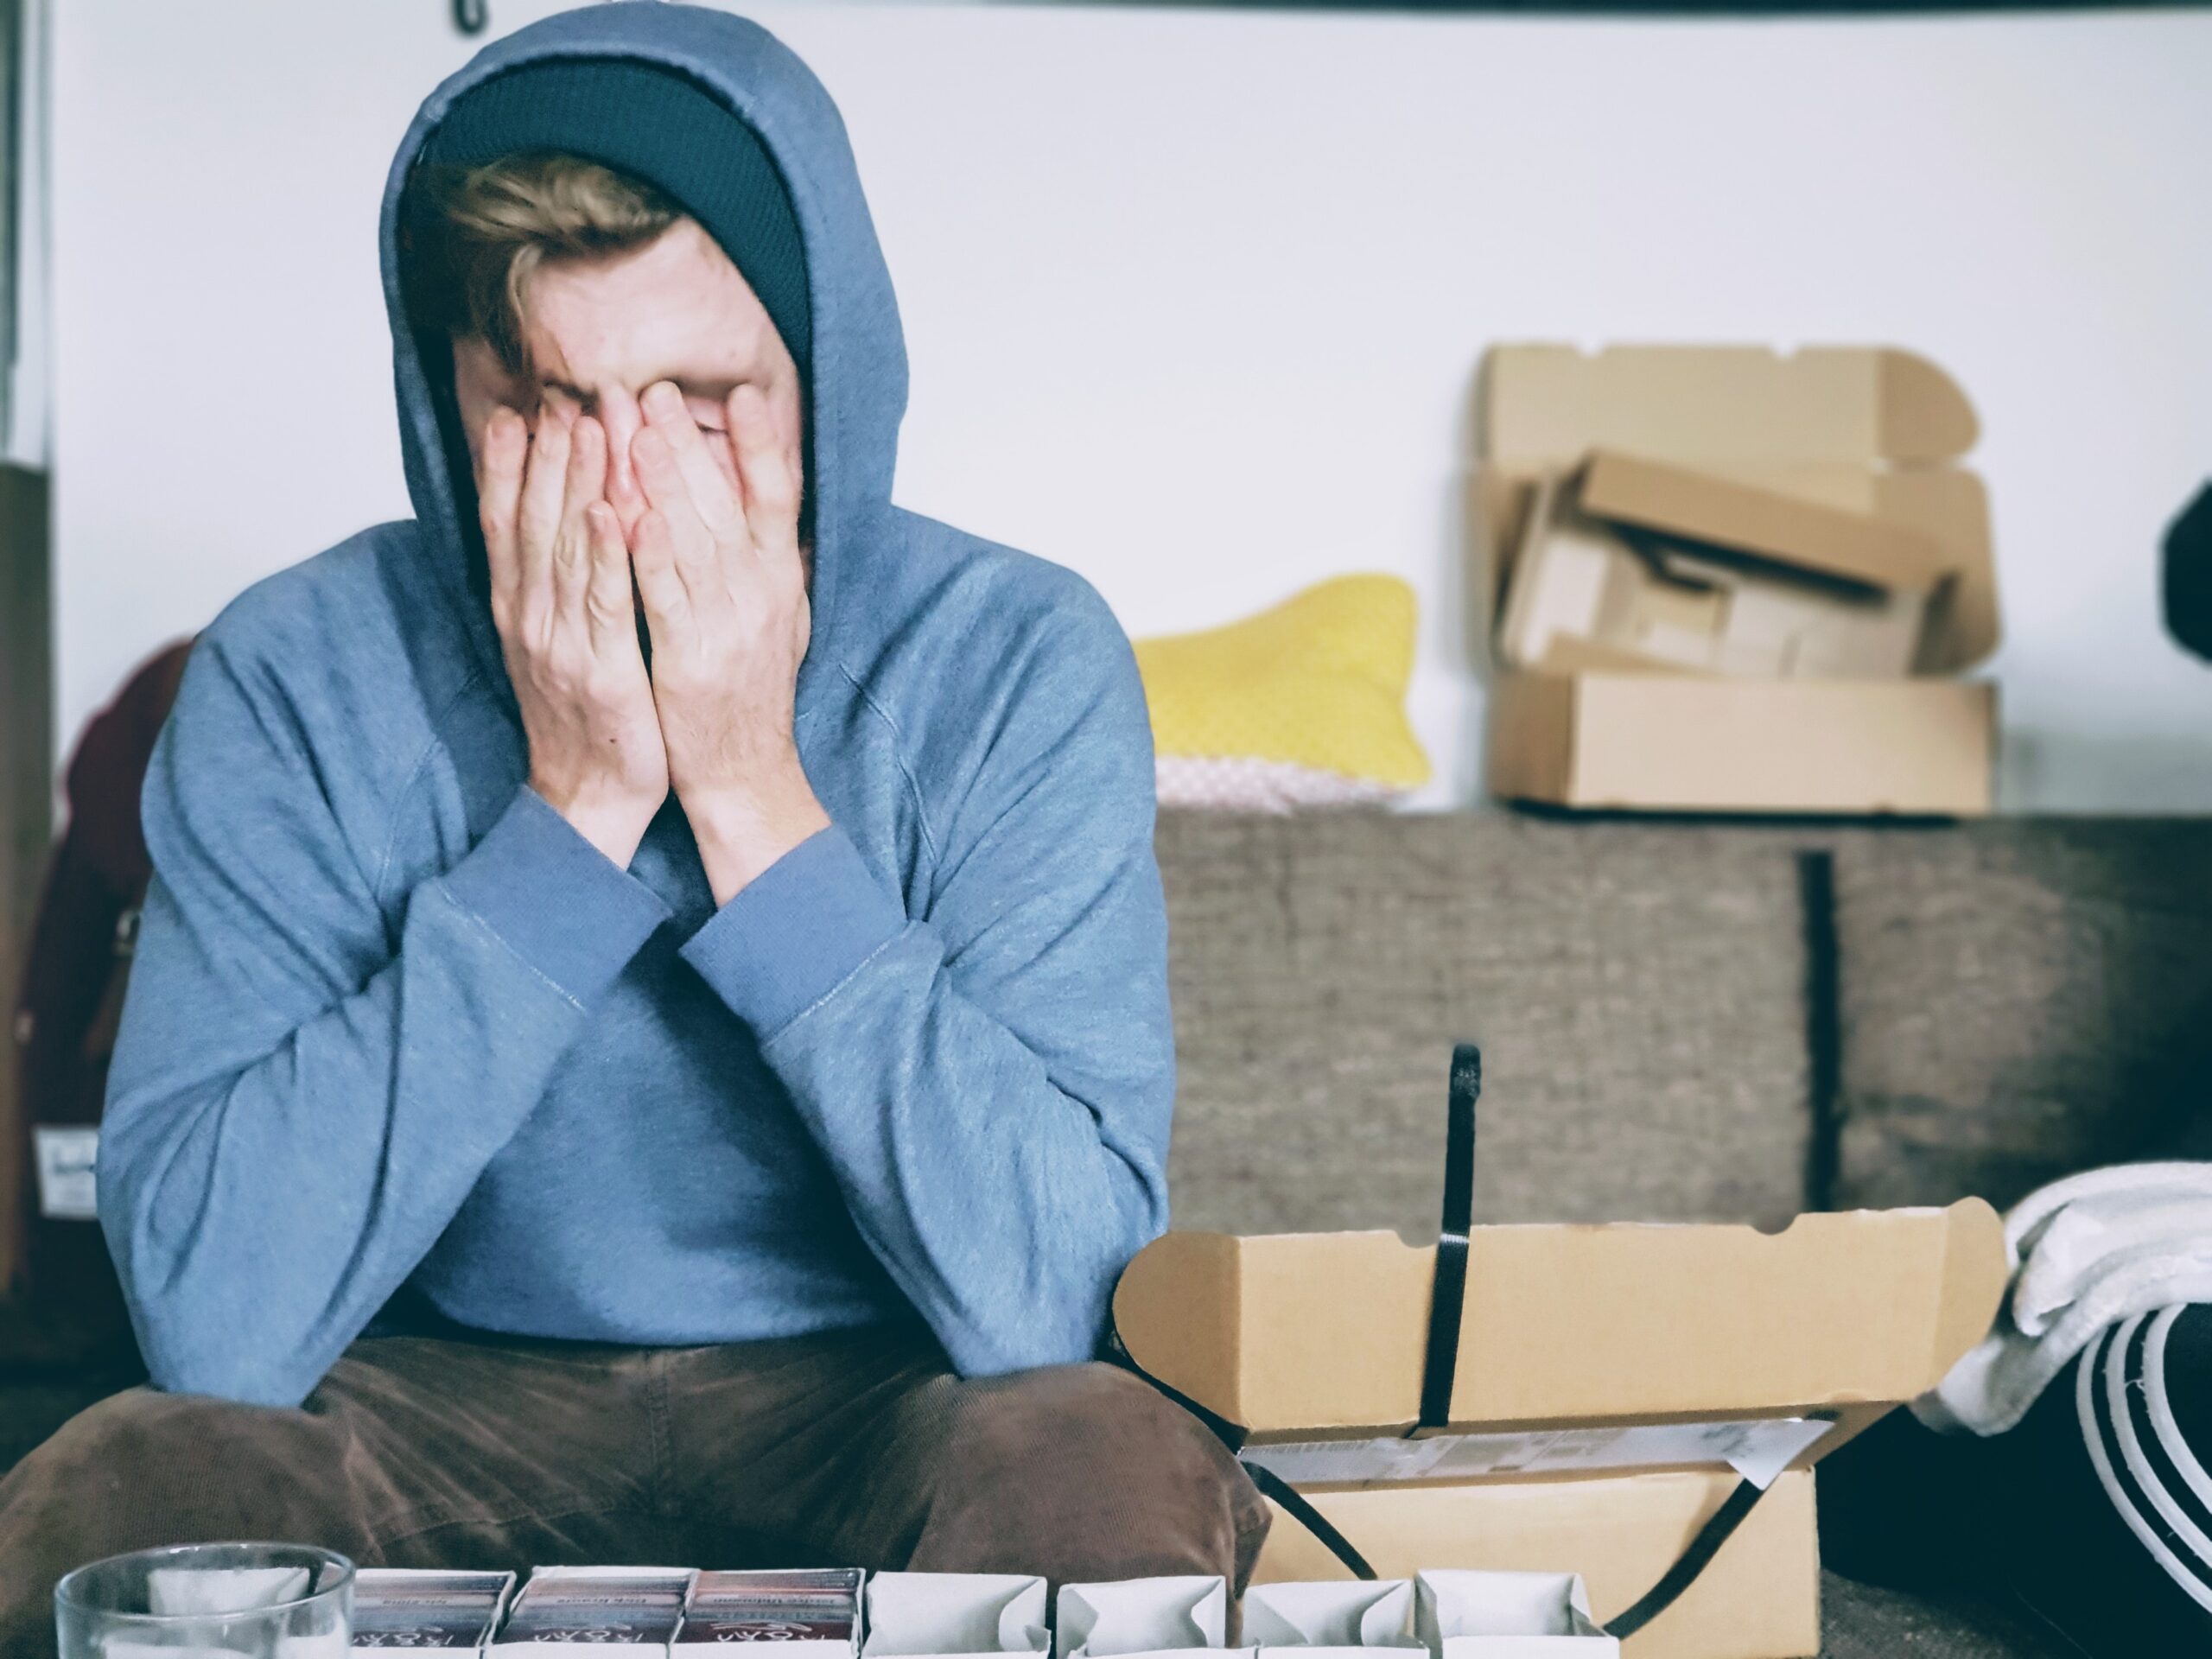 Man in hoody is sat down with hands across his face as if he is exhausted or upset